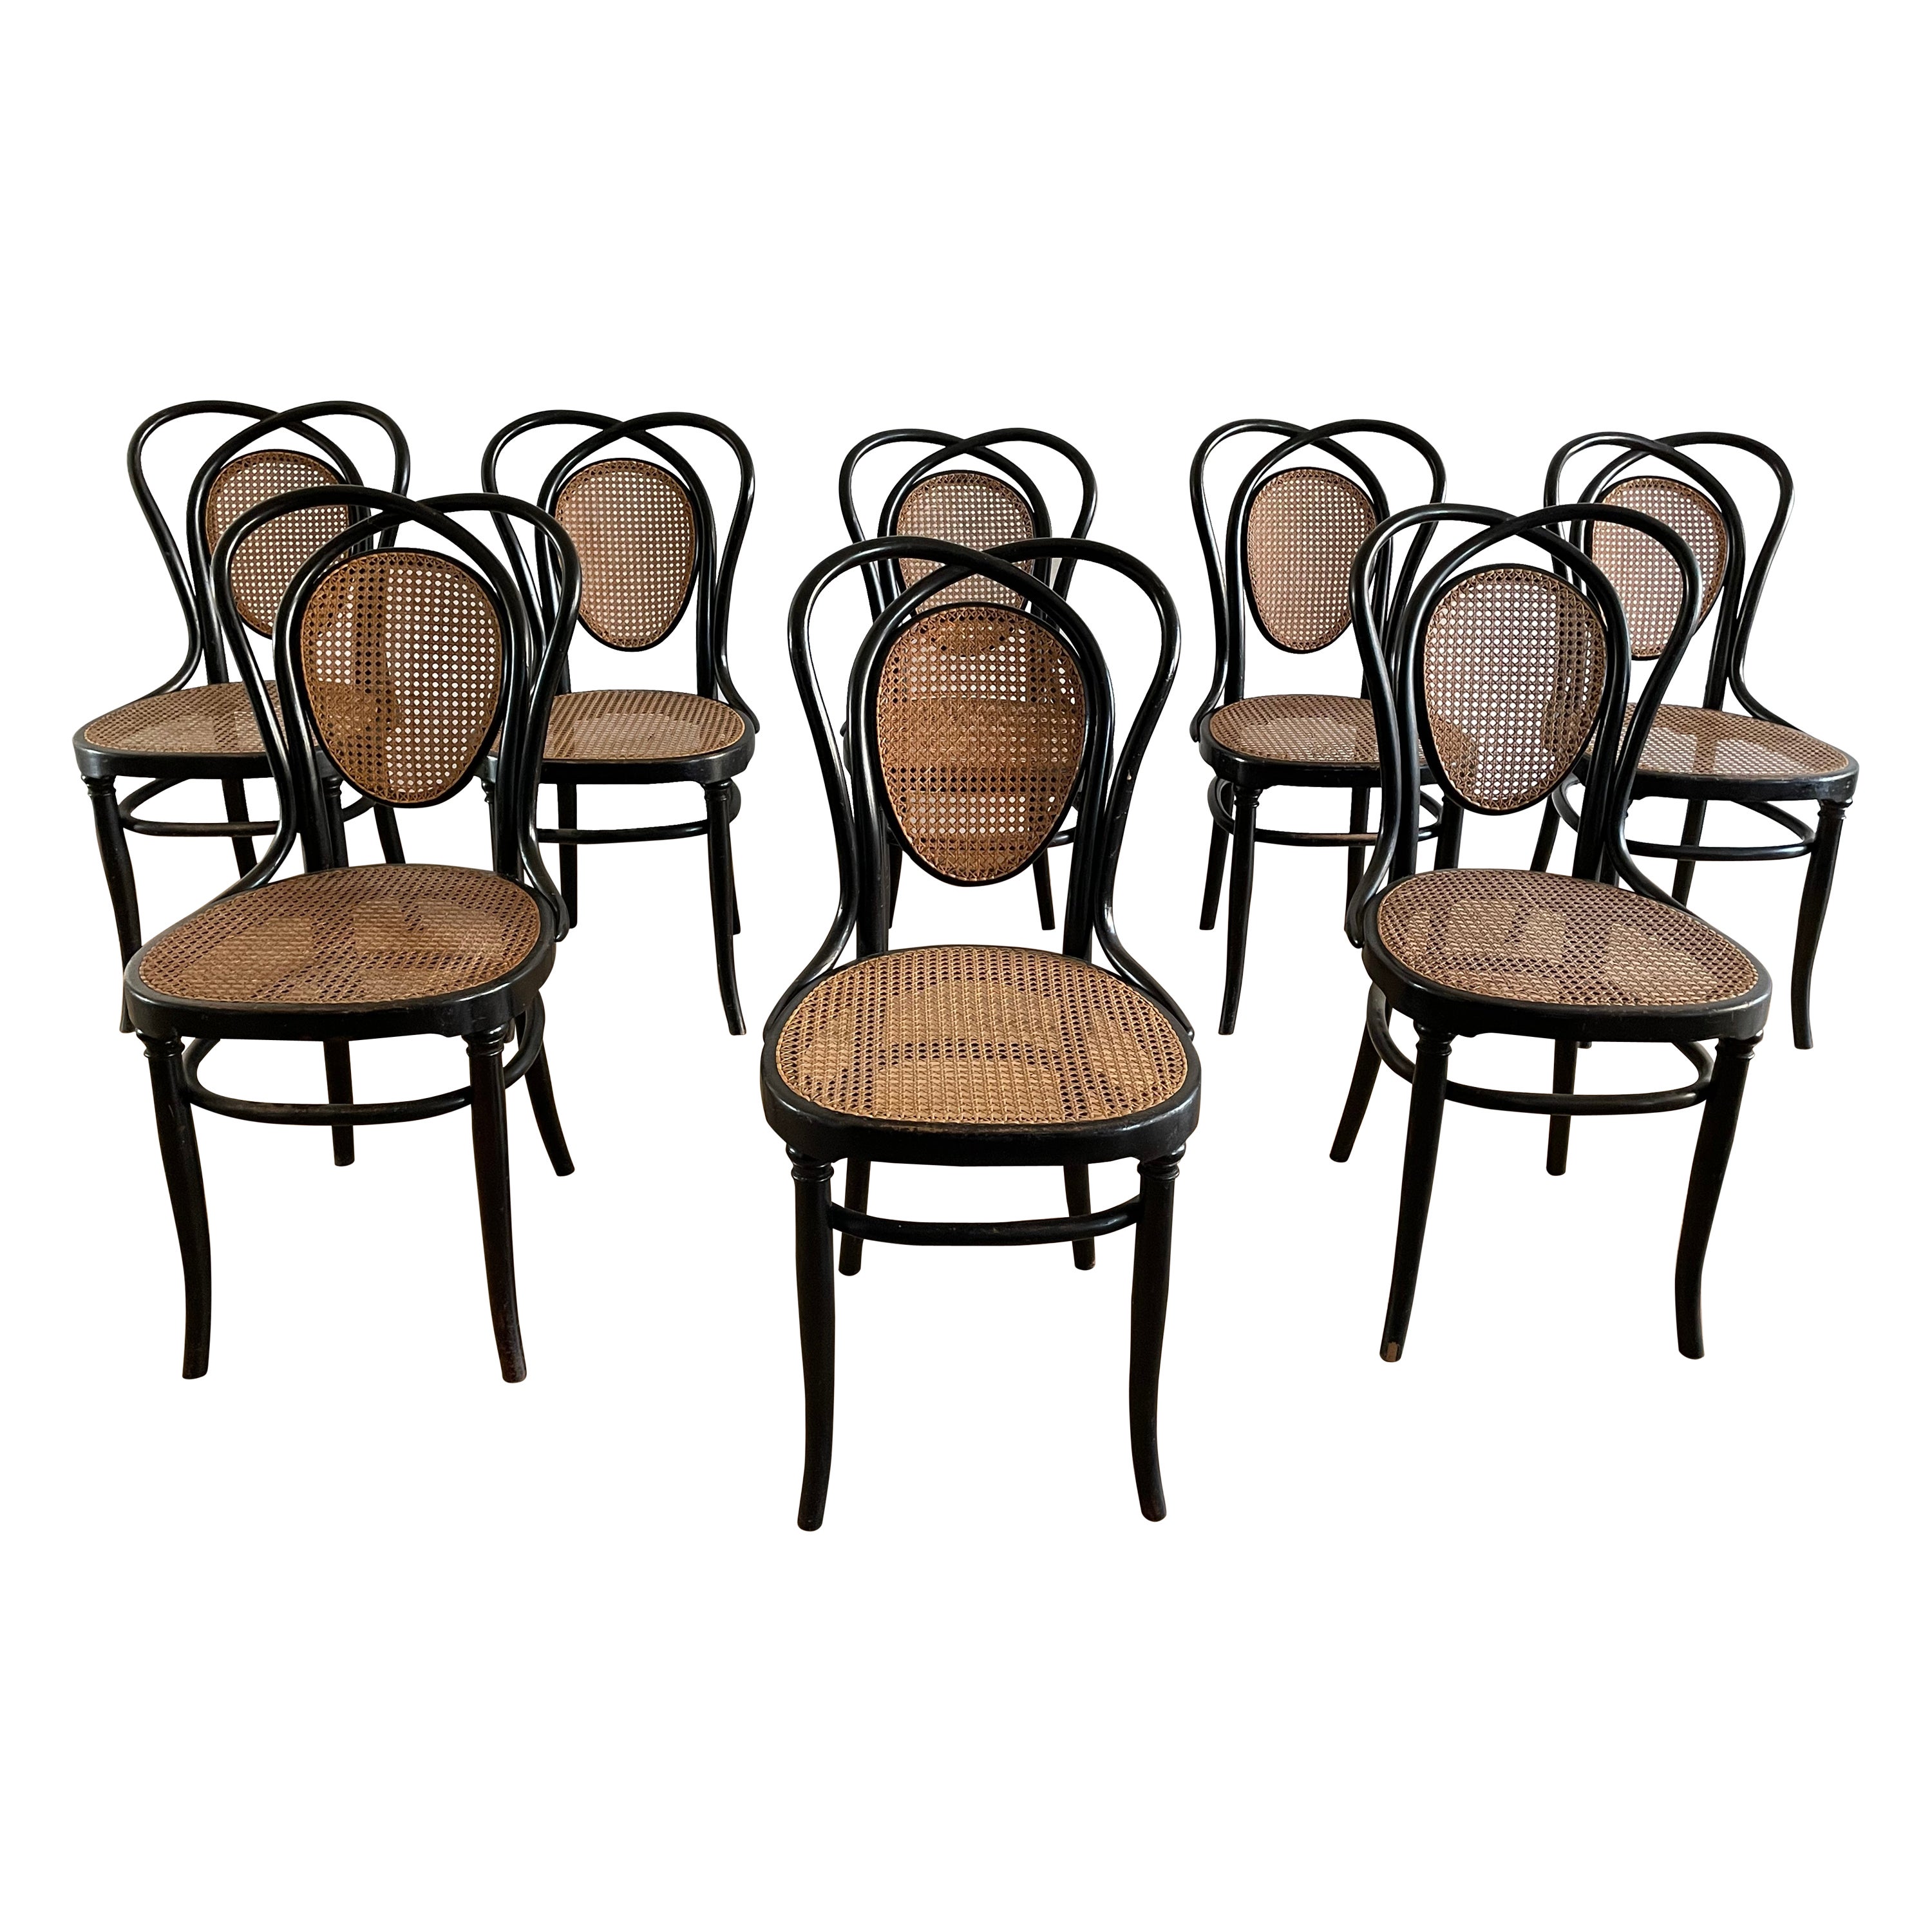 8 Viennese Chairs N.33 by J & J Kohn, 1900s For Sale